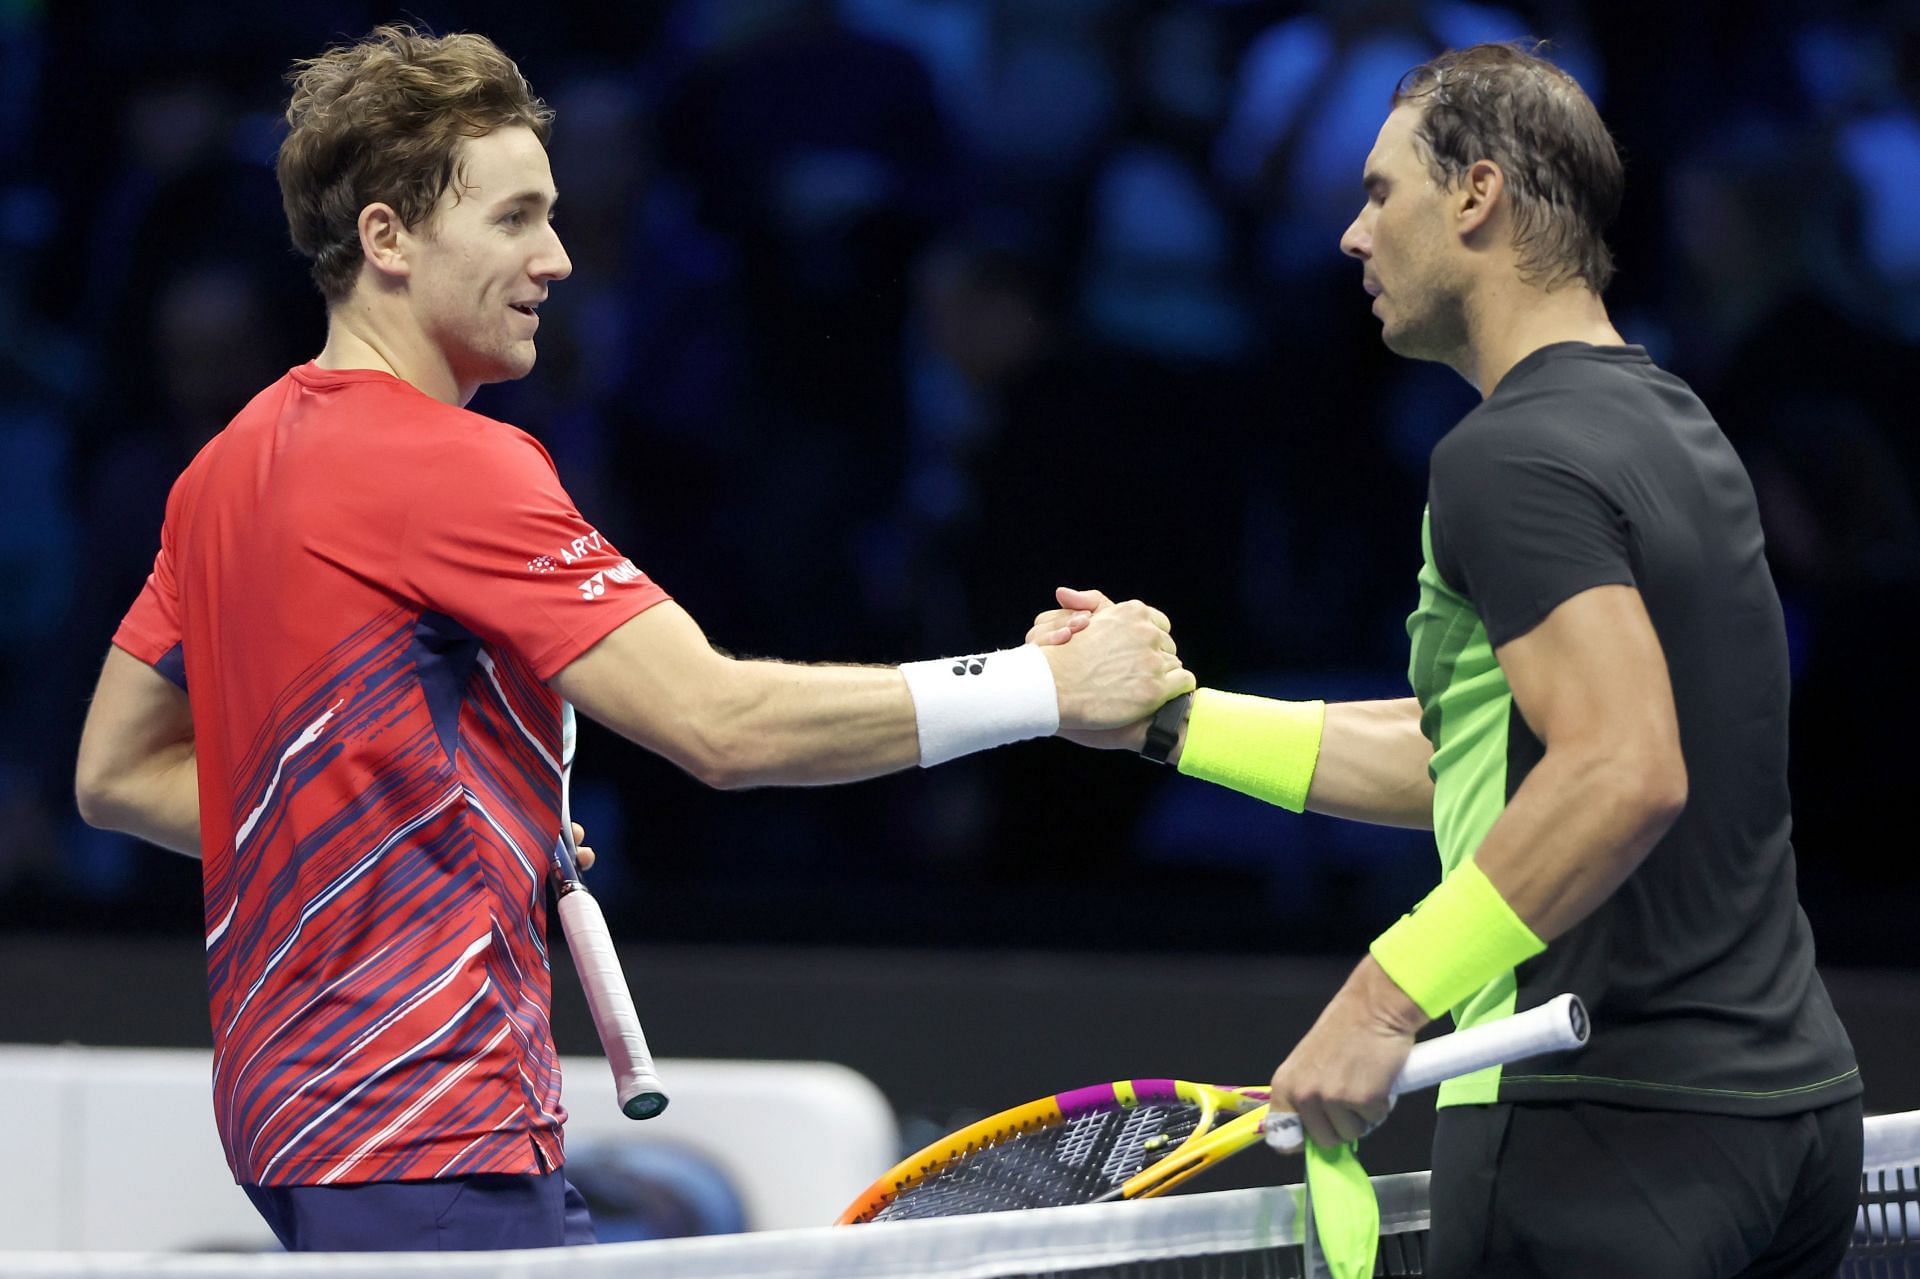 Casper Ruud (L) &amp; Rafael Nadal shake hands after their match at the ATP Finals